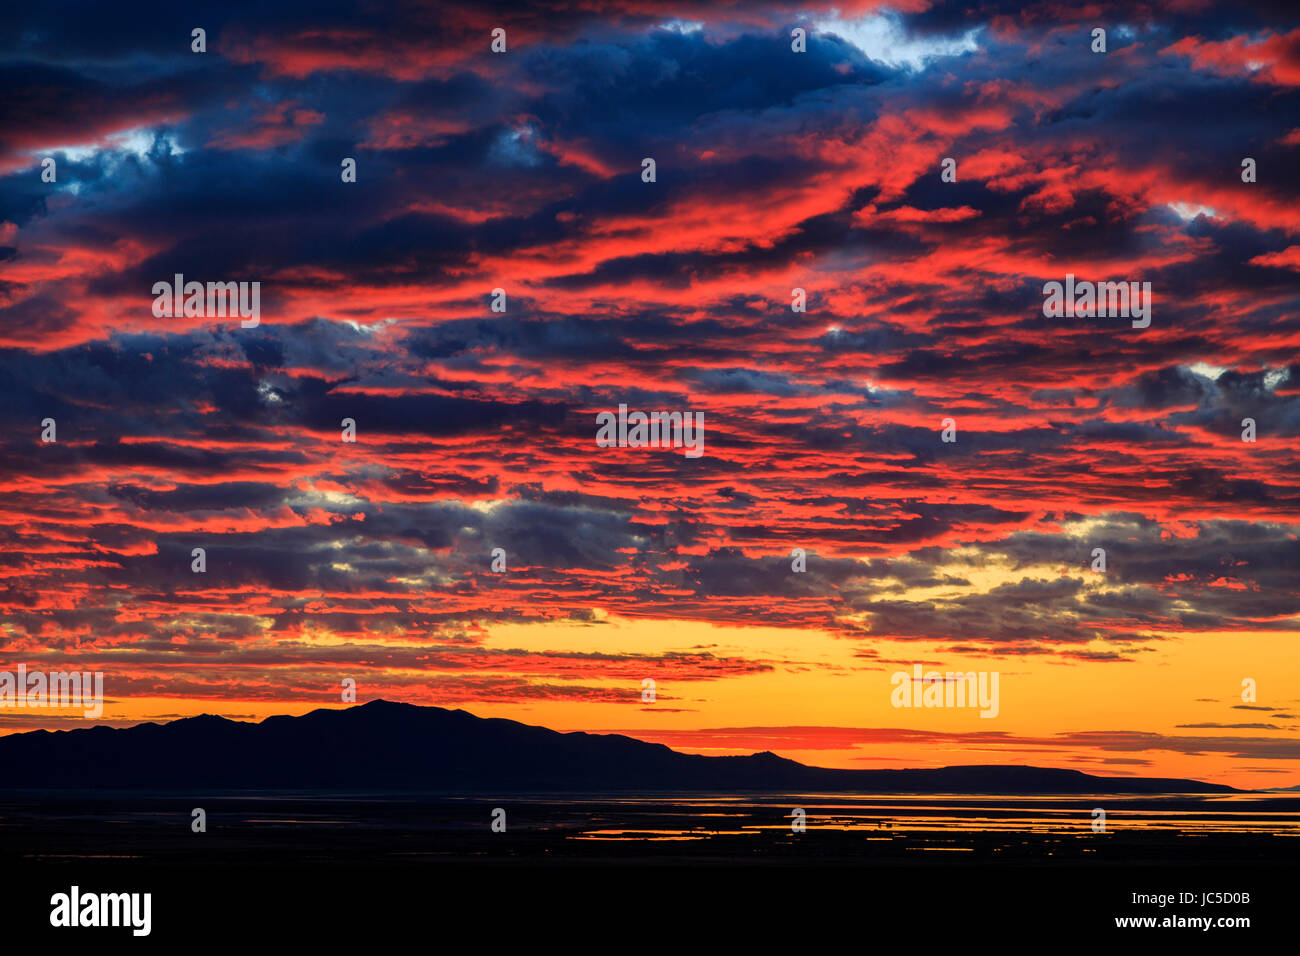 The afterglow of the sunset lights up the bottom of the clouds over Antelope Island.  Antelope Island is the largest island in the Great Salt Lake. Stock Photo